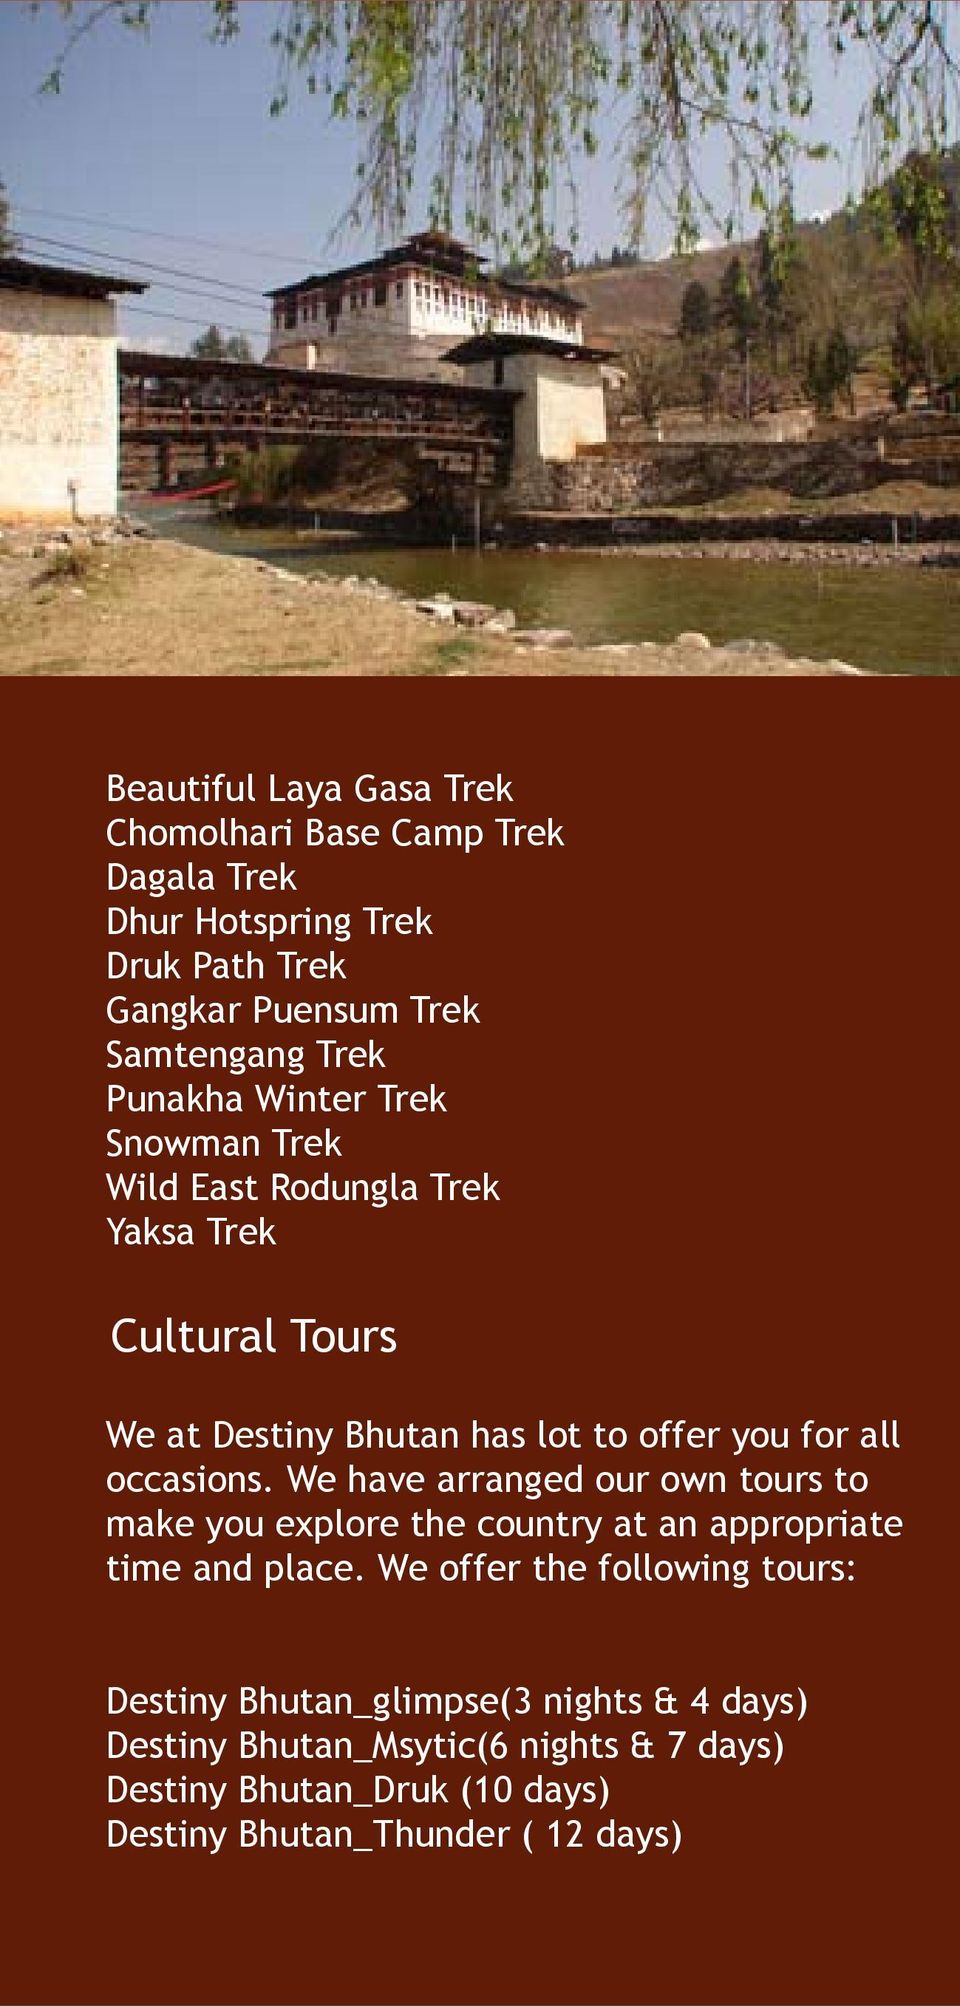 occasions. We have arranged our own tours to make you explore the country at an appropriate time and place.